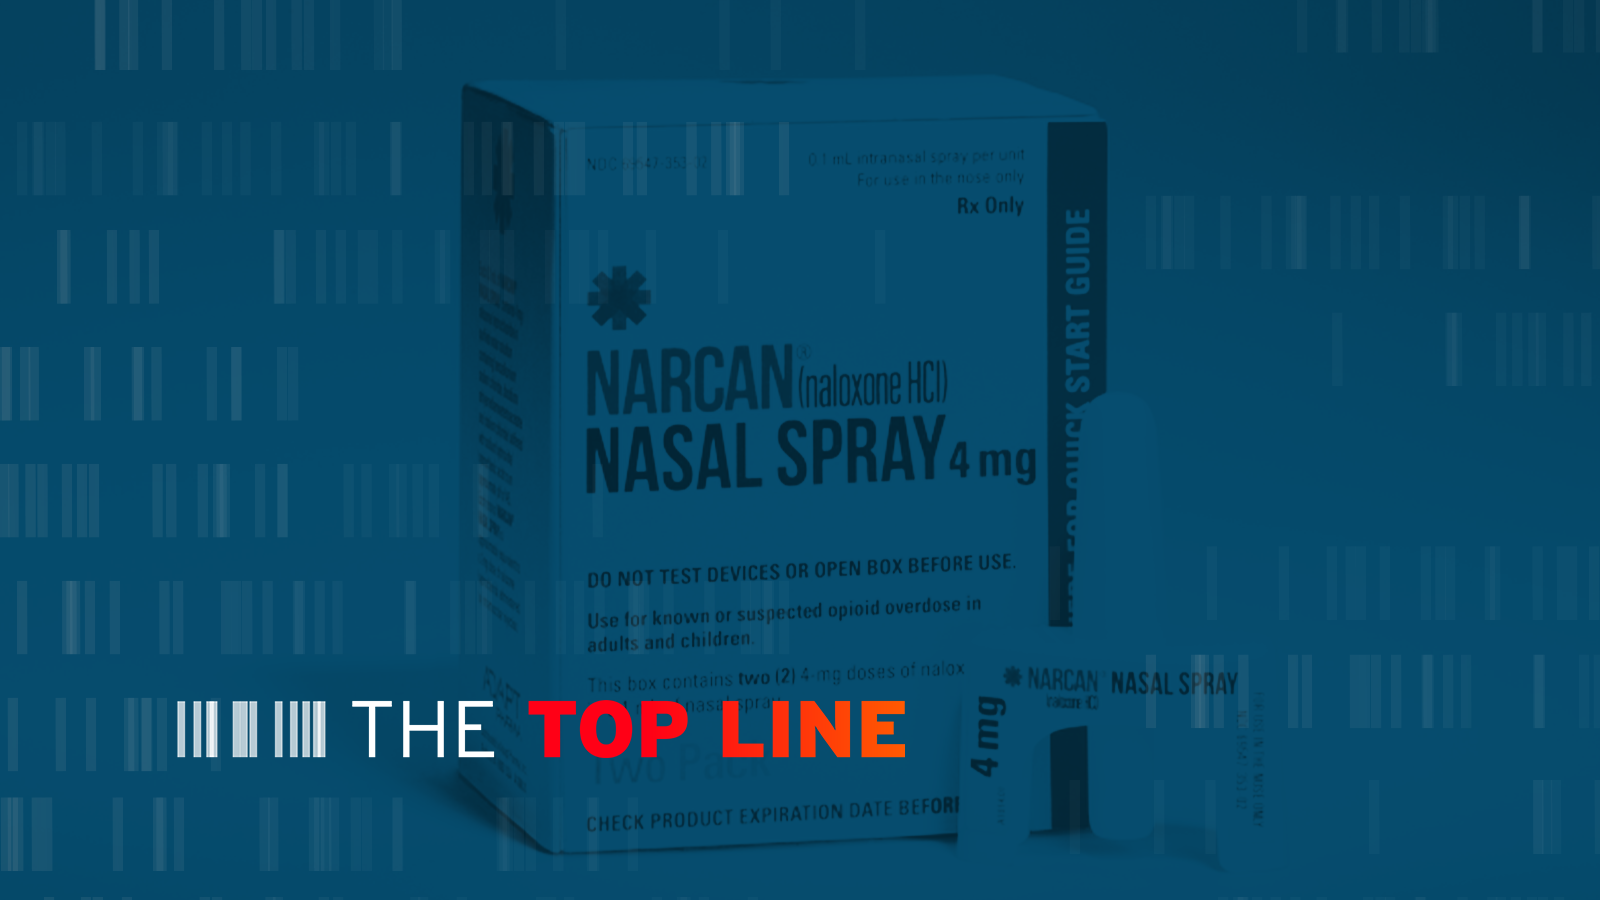 'The Top Line': A special episode on Narcan, the life-saving nasal spray